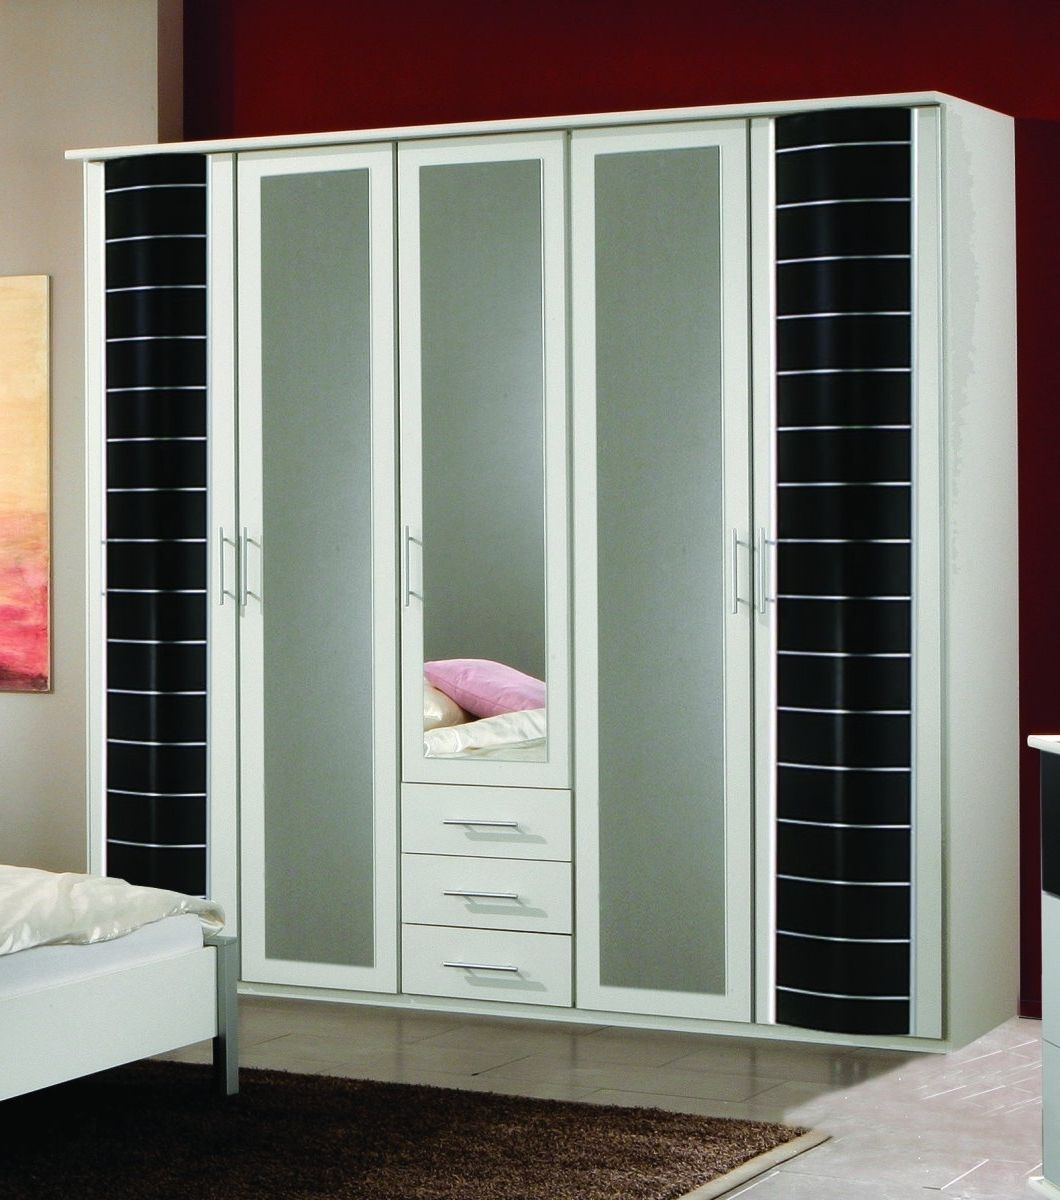 Cheap Good Quality Wardrobes Armoire Wardrobe Closet Sliding Doors With Well Liked Black Wardrobes With Drawers (View 12 of 15)